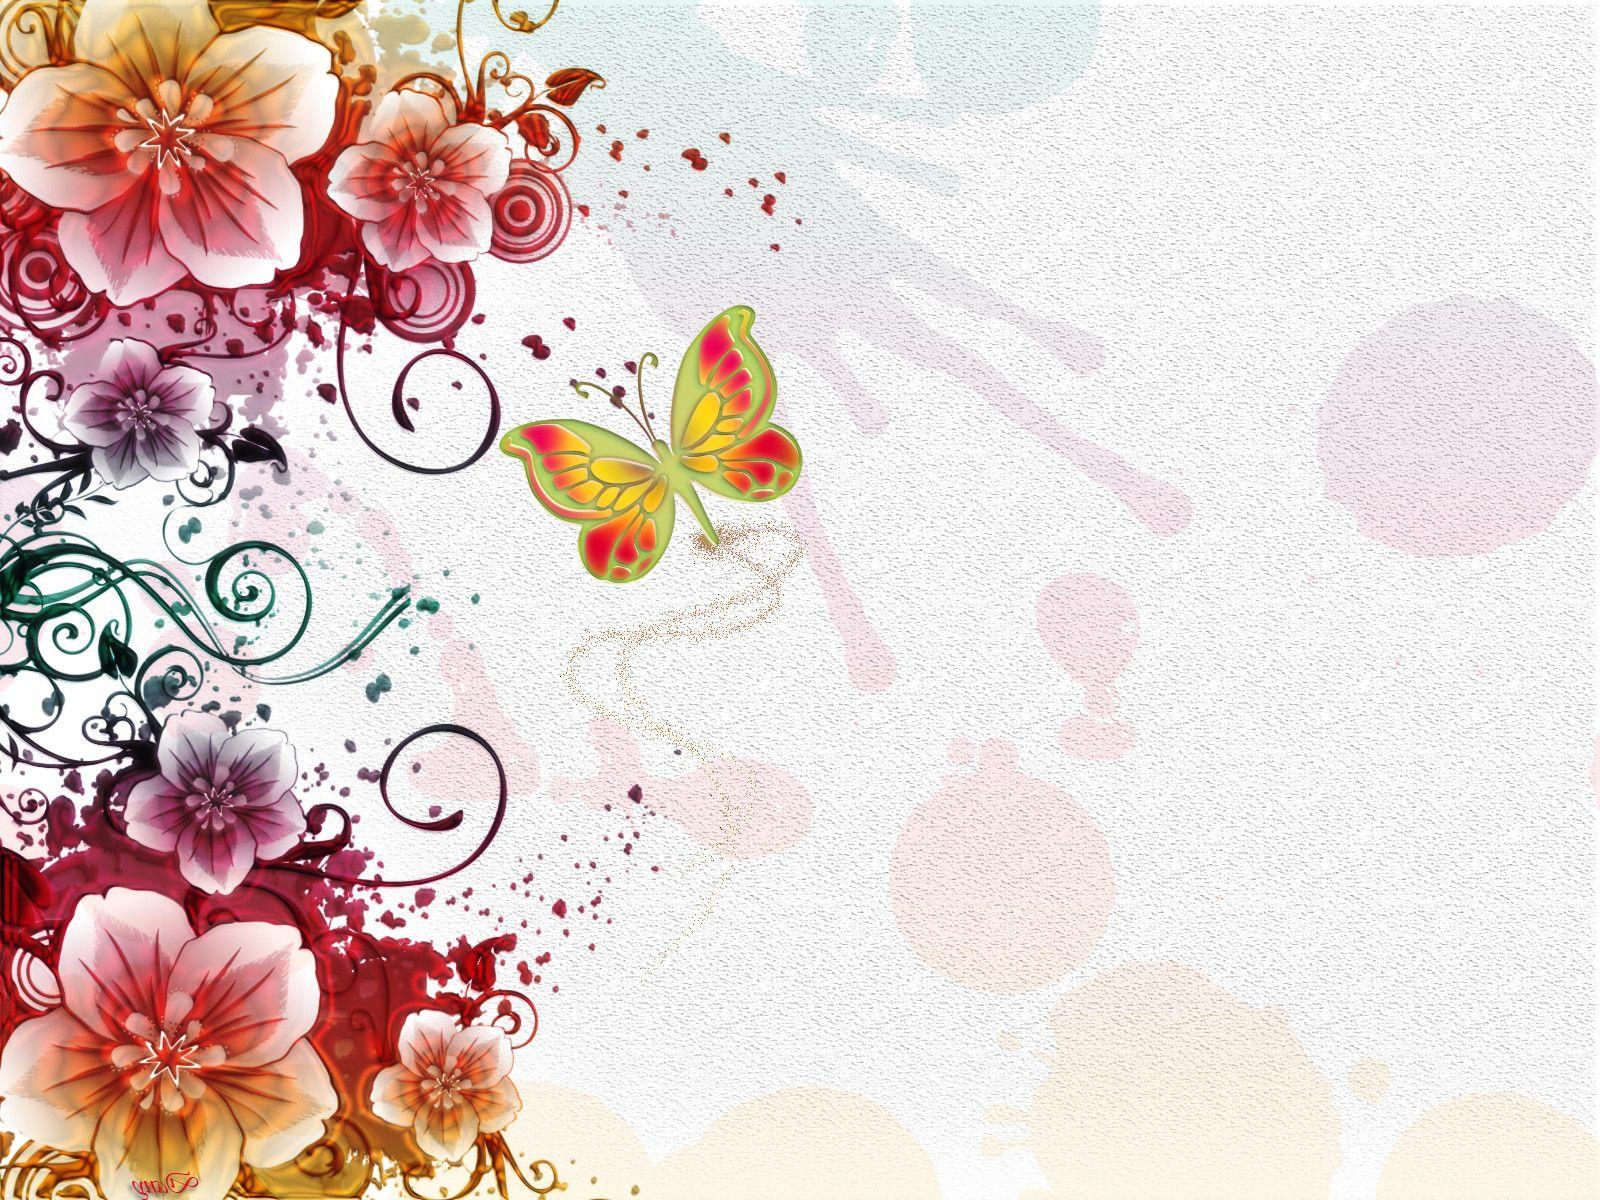 Abstract Butterfly Wallpaper